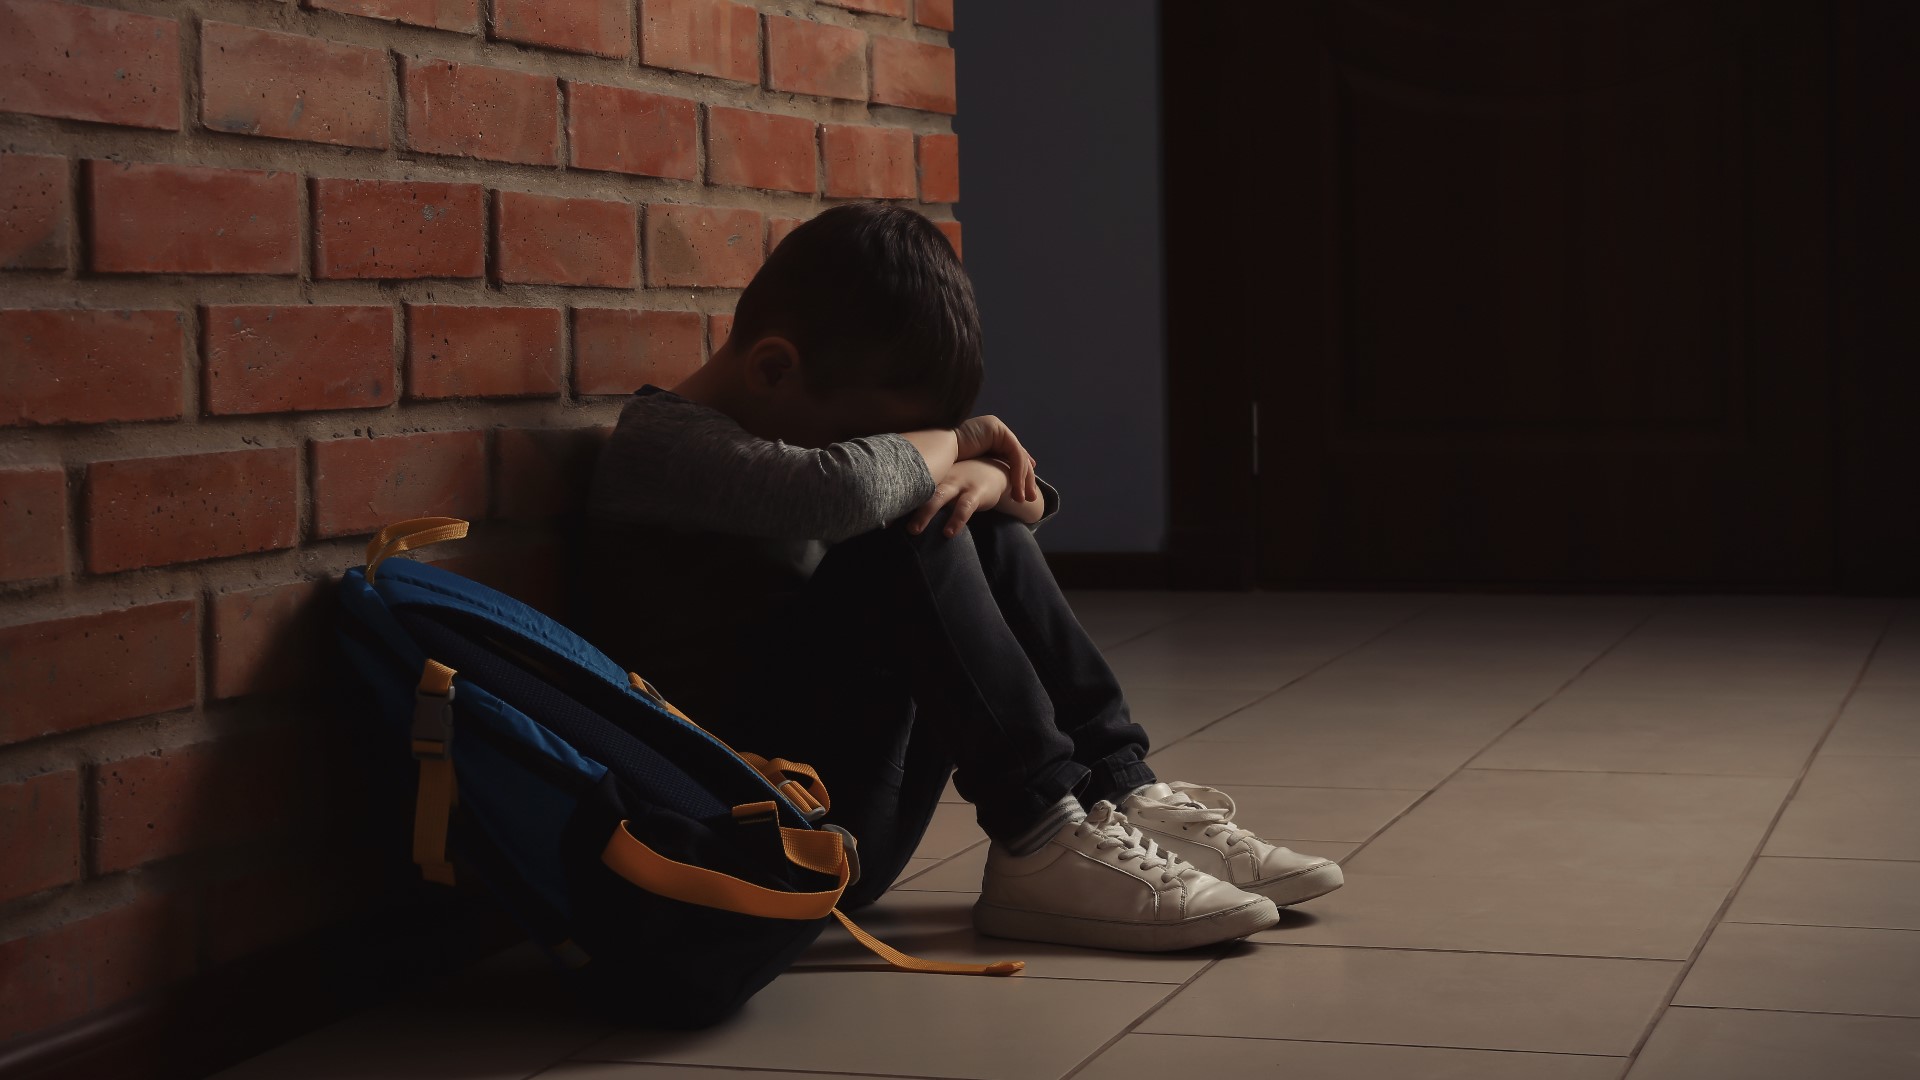 According to the South Carolina Committee on Children, suicide is the leading cause of death for kids between 10 and 17-years-old in South Carolina.